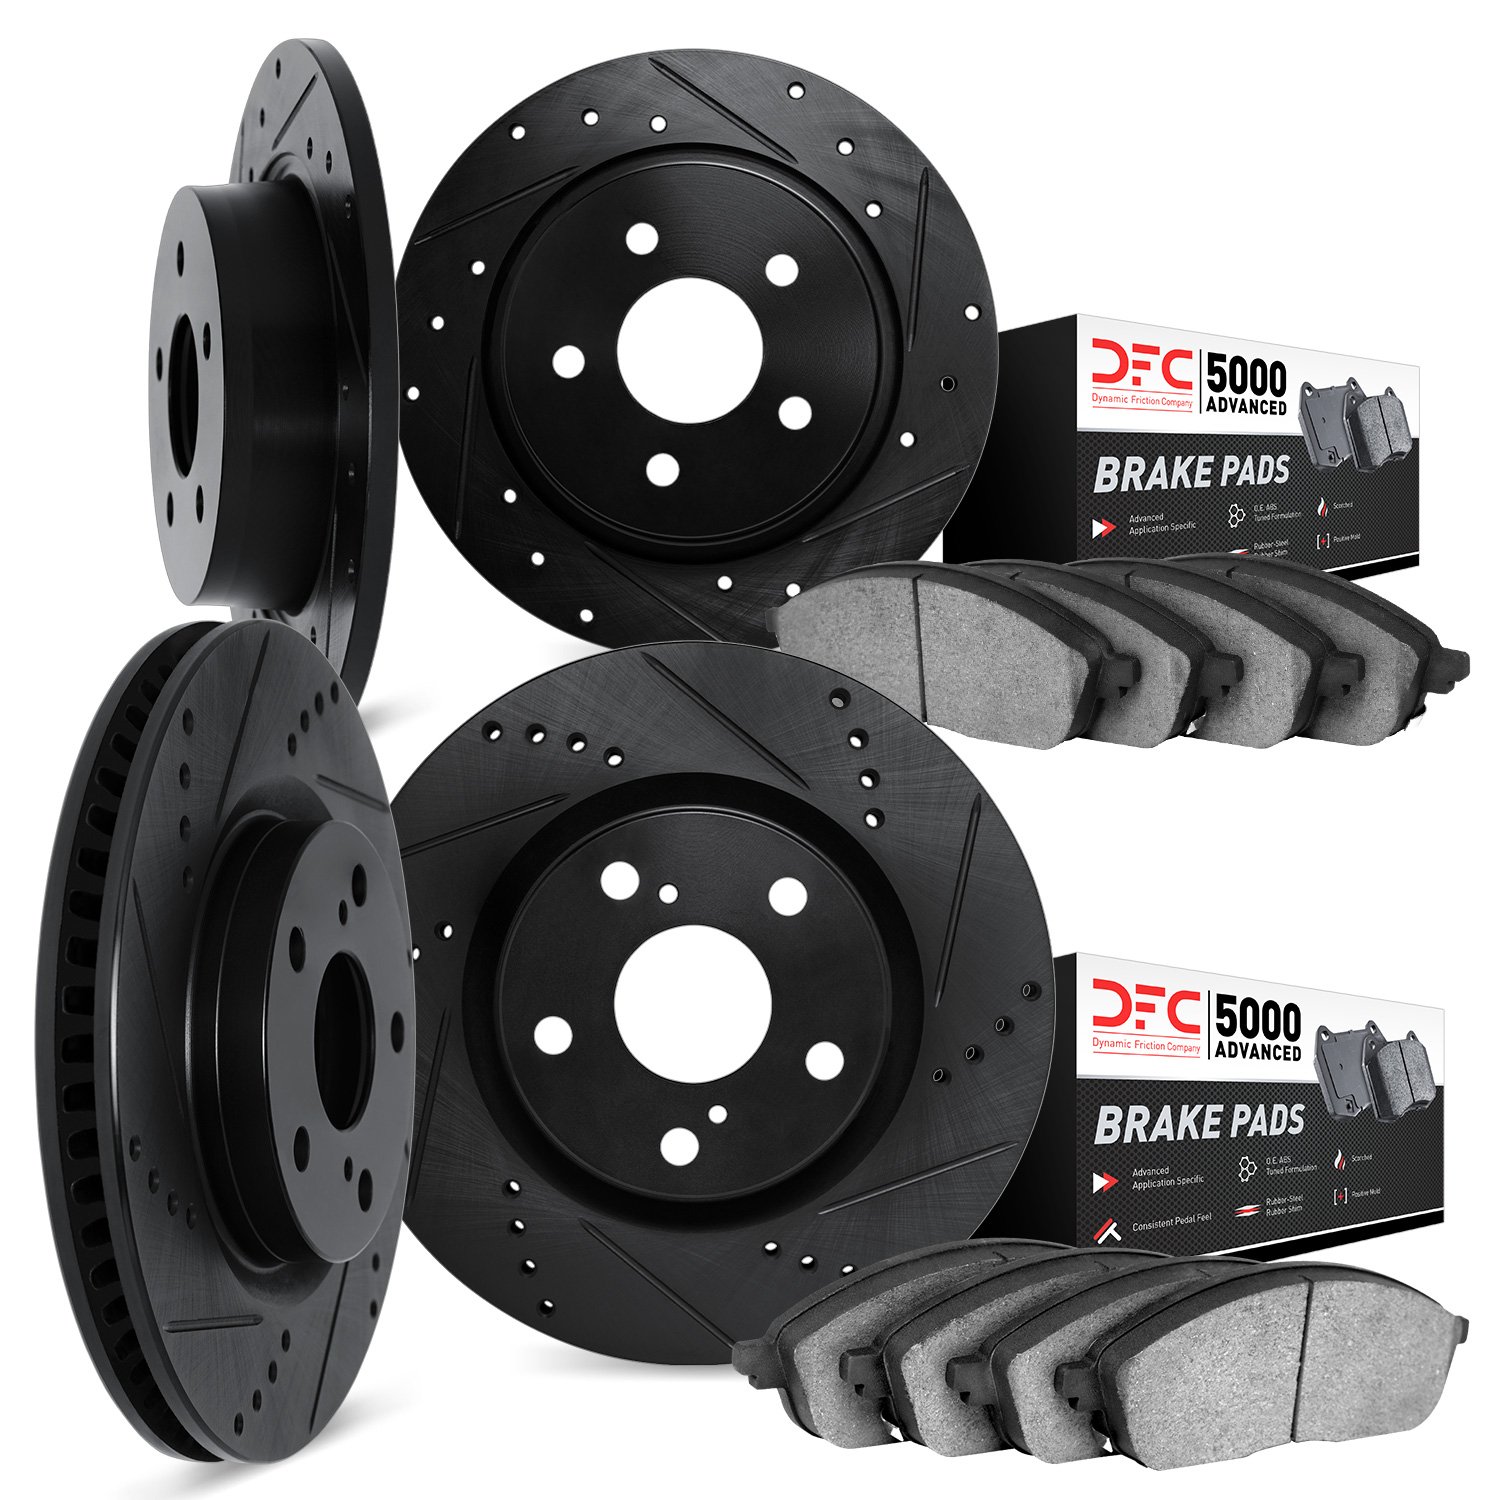 8504-72050 Drilled/Slotted Brake Rotors w/5000 Advanced Brake Pads Kit [Black], 2009-2015 Mitsubishi, Position: Front and Rear